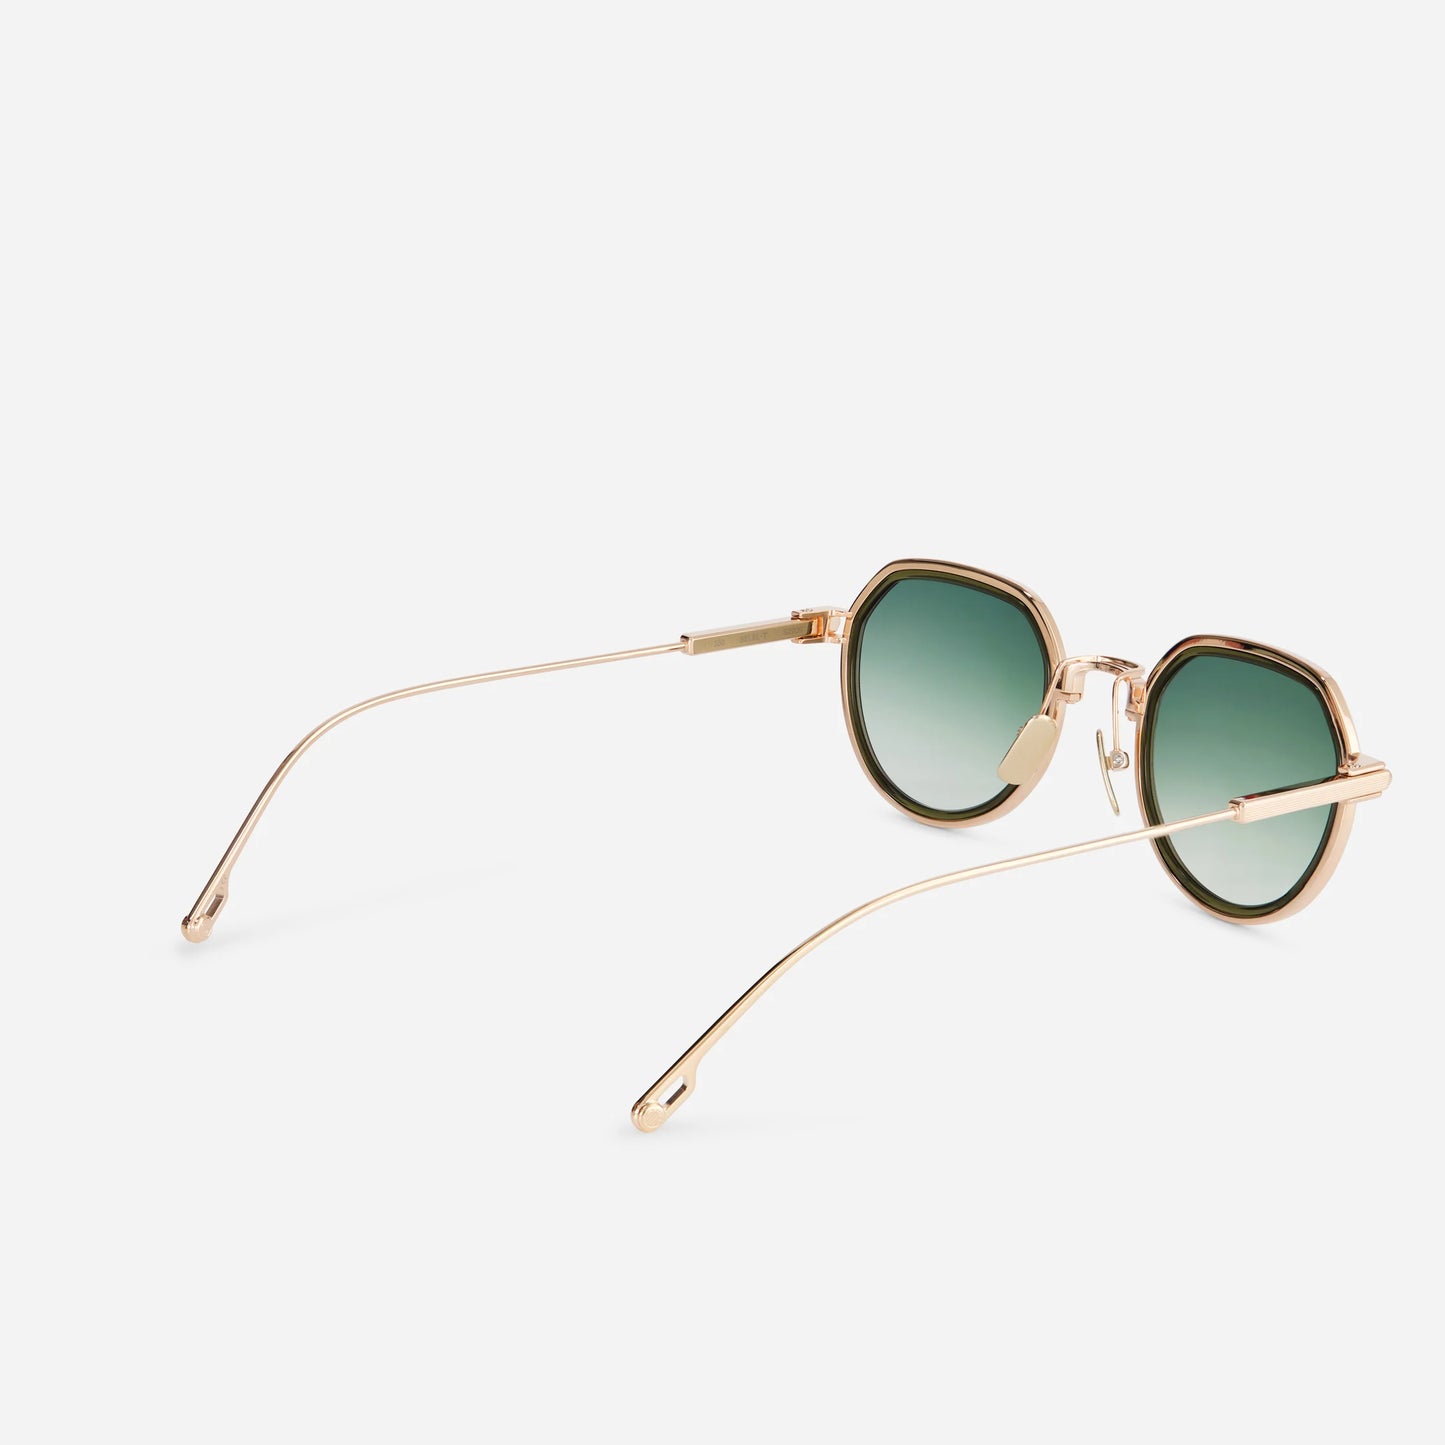 Belel-T S2209 sunglasses, beautifully designed in pure rose gold titanium, boasting green gradient lenses and a refined olive green insert.